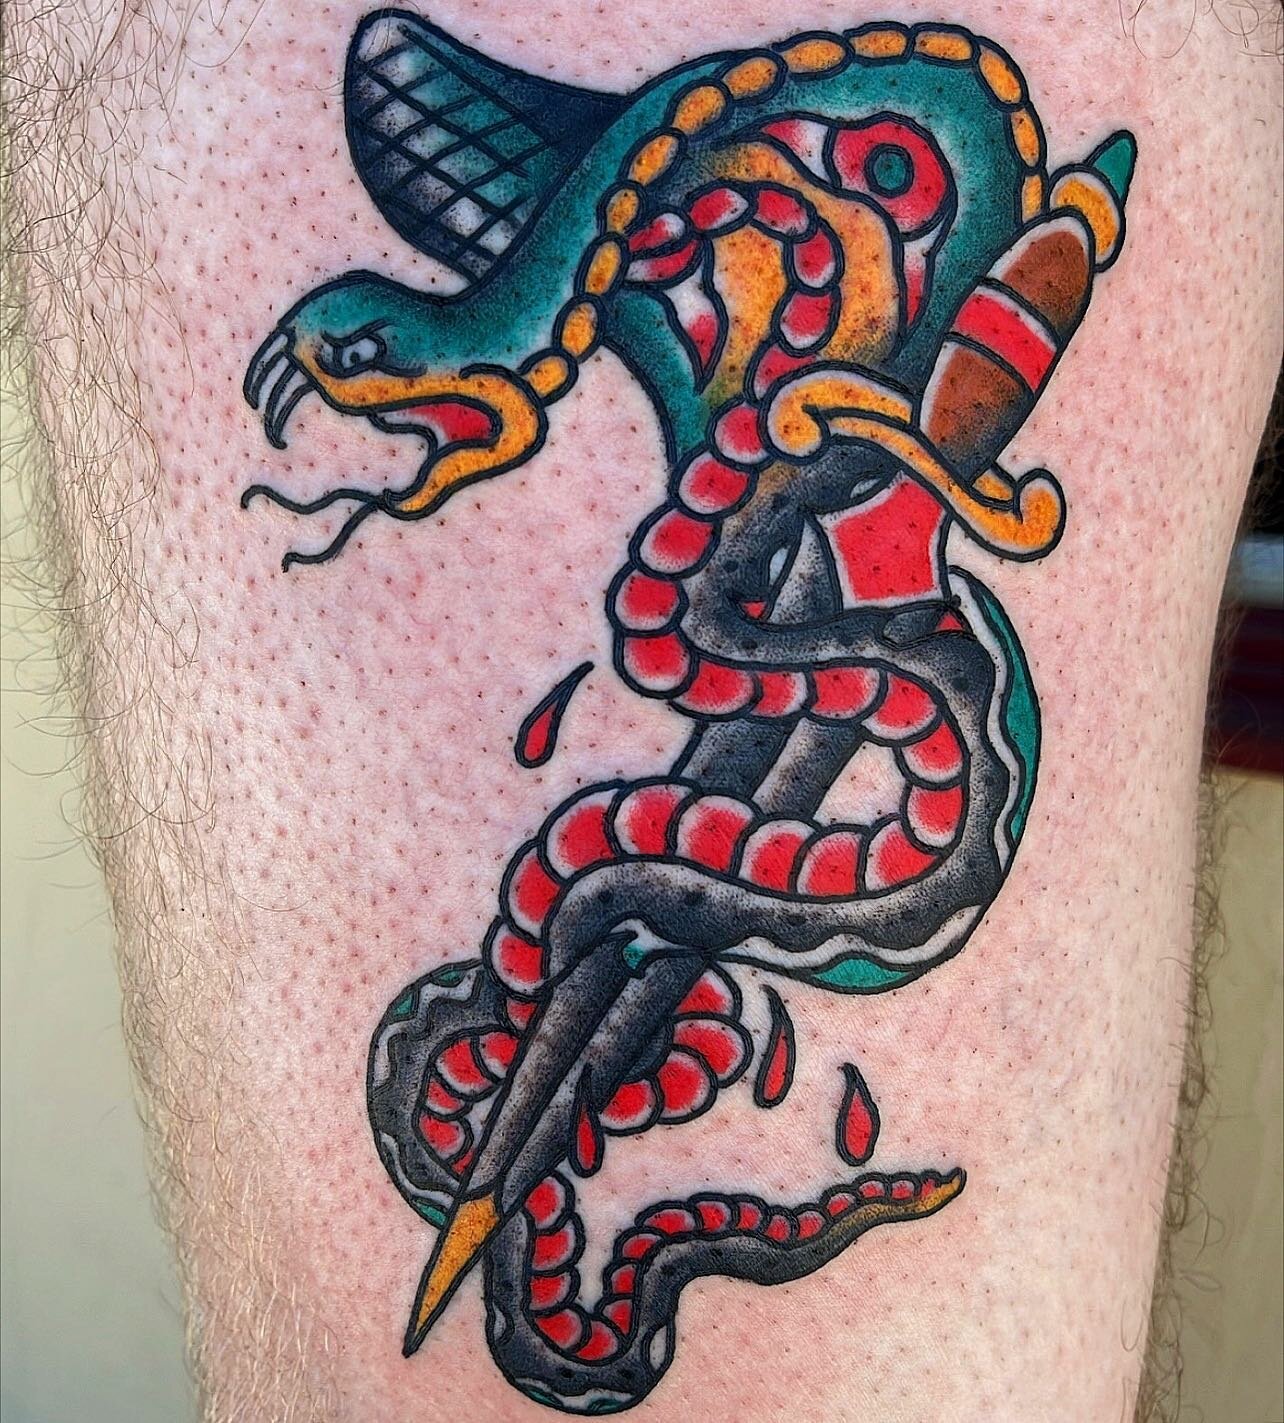 Heres a snake and dagger @kd1904 made on Nash over the weekend here at the shop!  Nash, sat like a champ!  Thank you!  More American Traditional please!  Clementinetattoo.com #clementinetattoo #clementine #sandiegotattooartist #sandiegotattooshop #sa